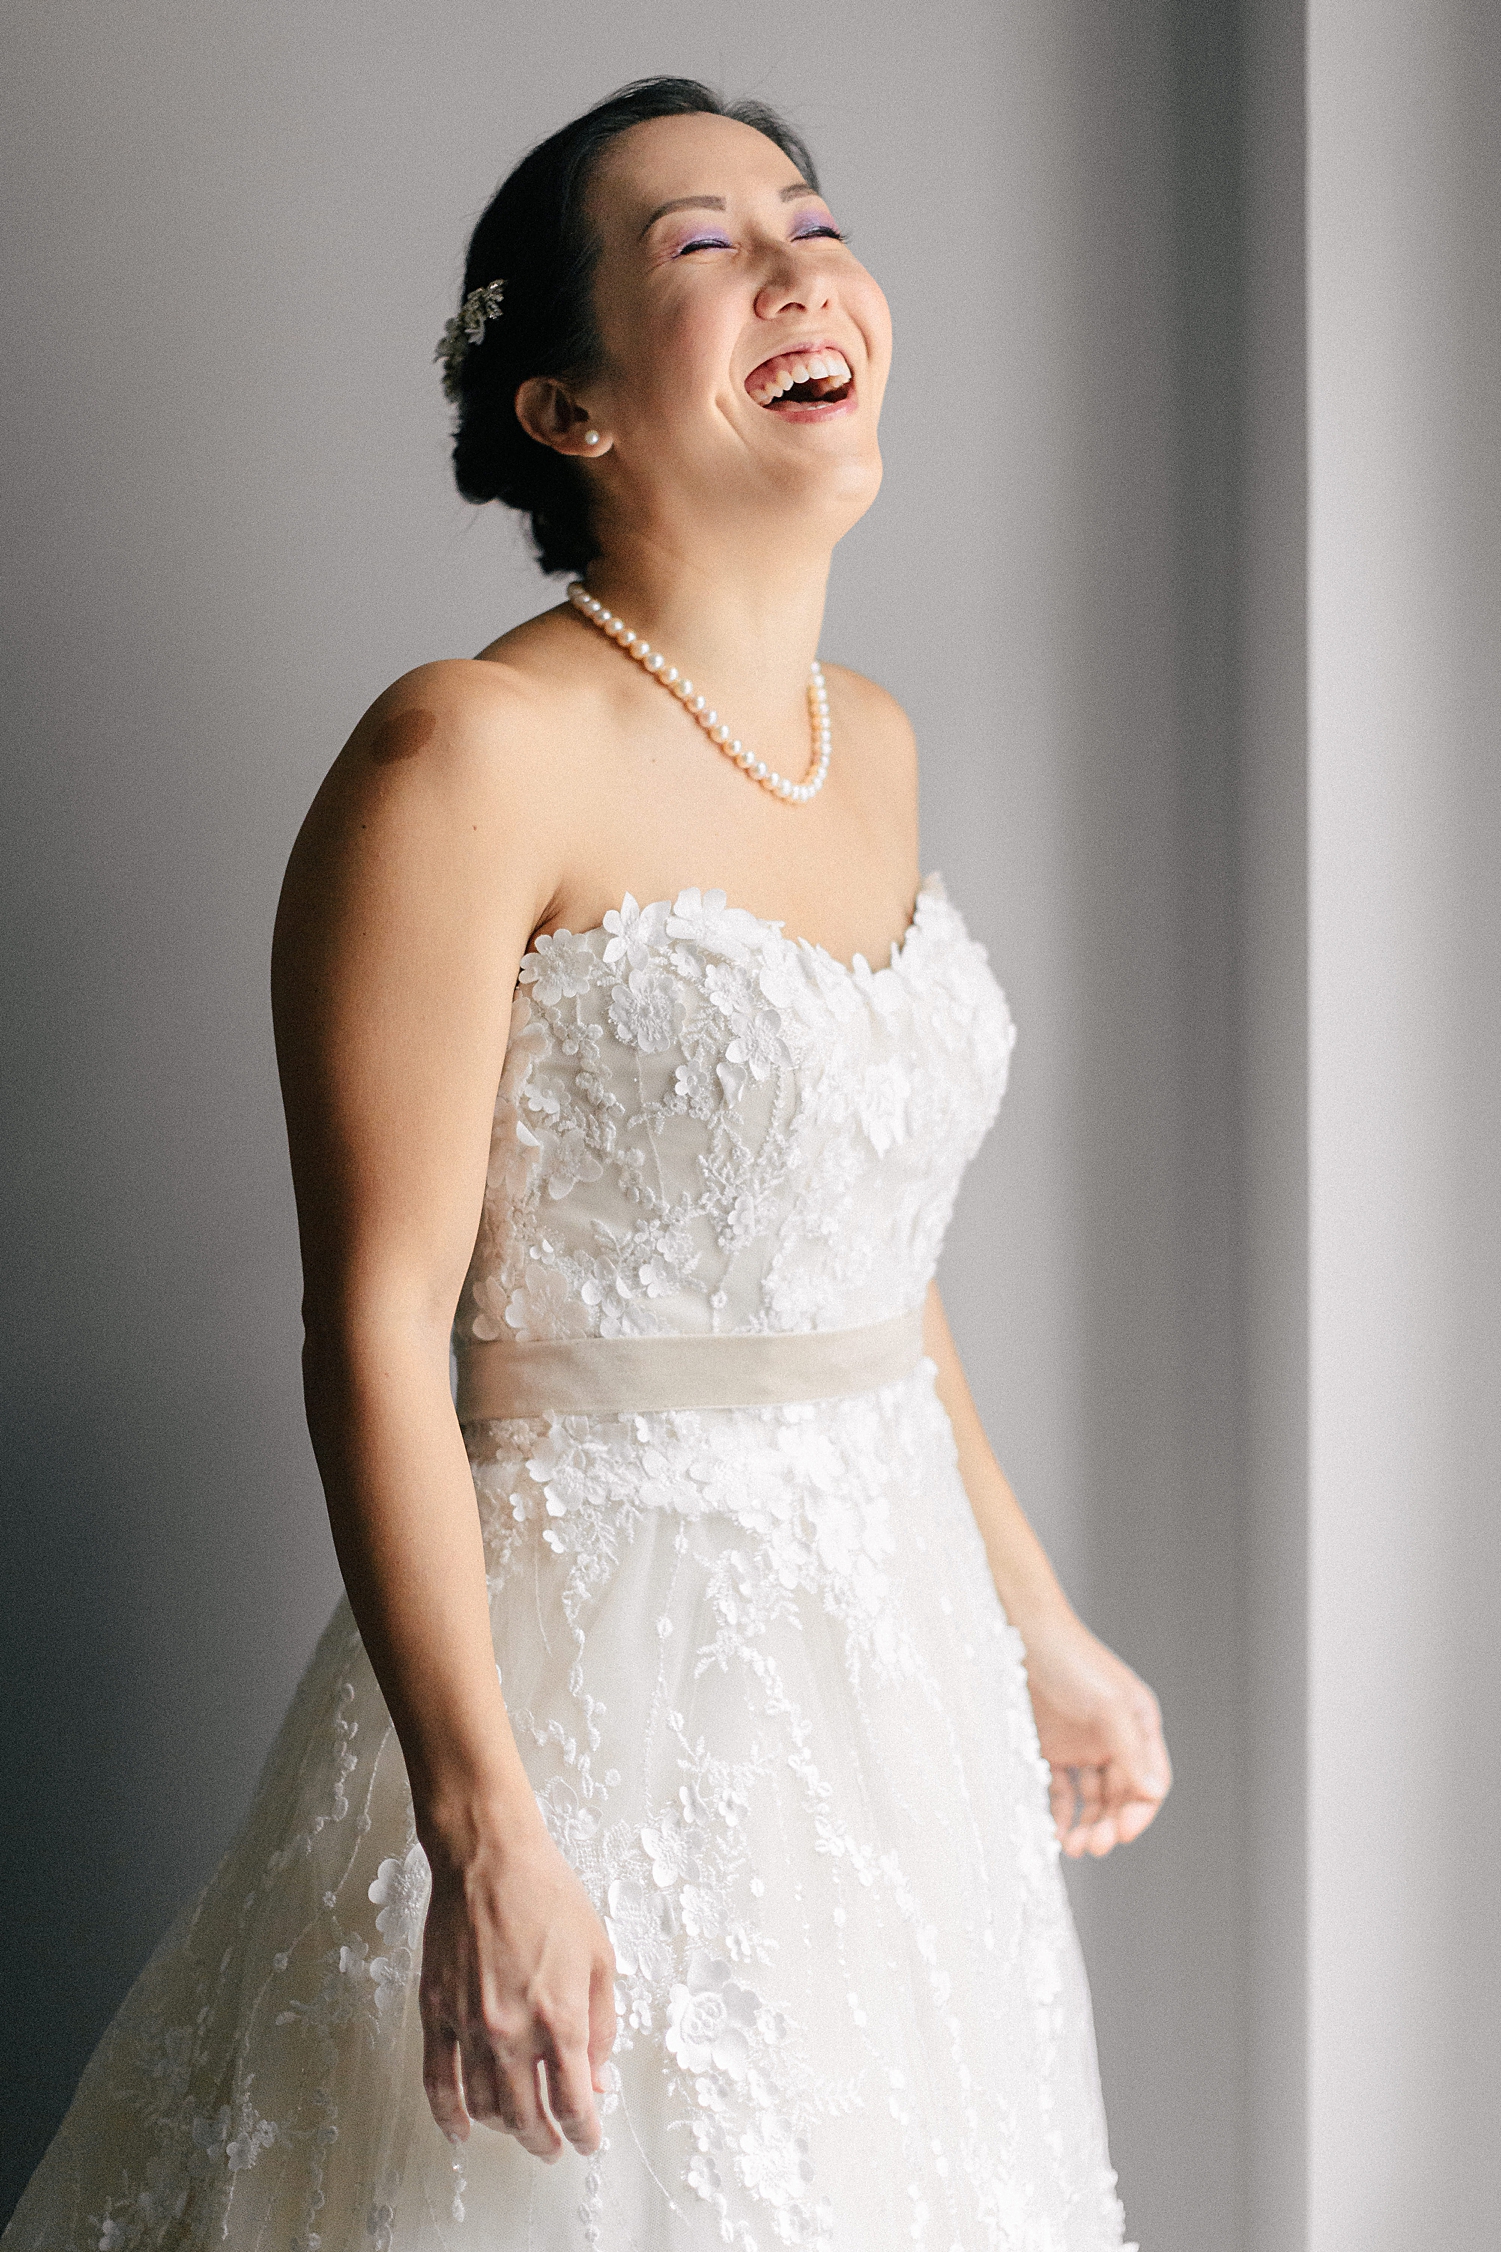 bride in strapless wedding dress pearl necklace laughing